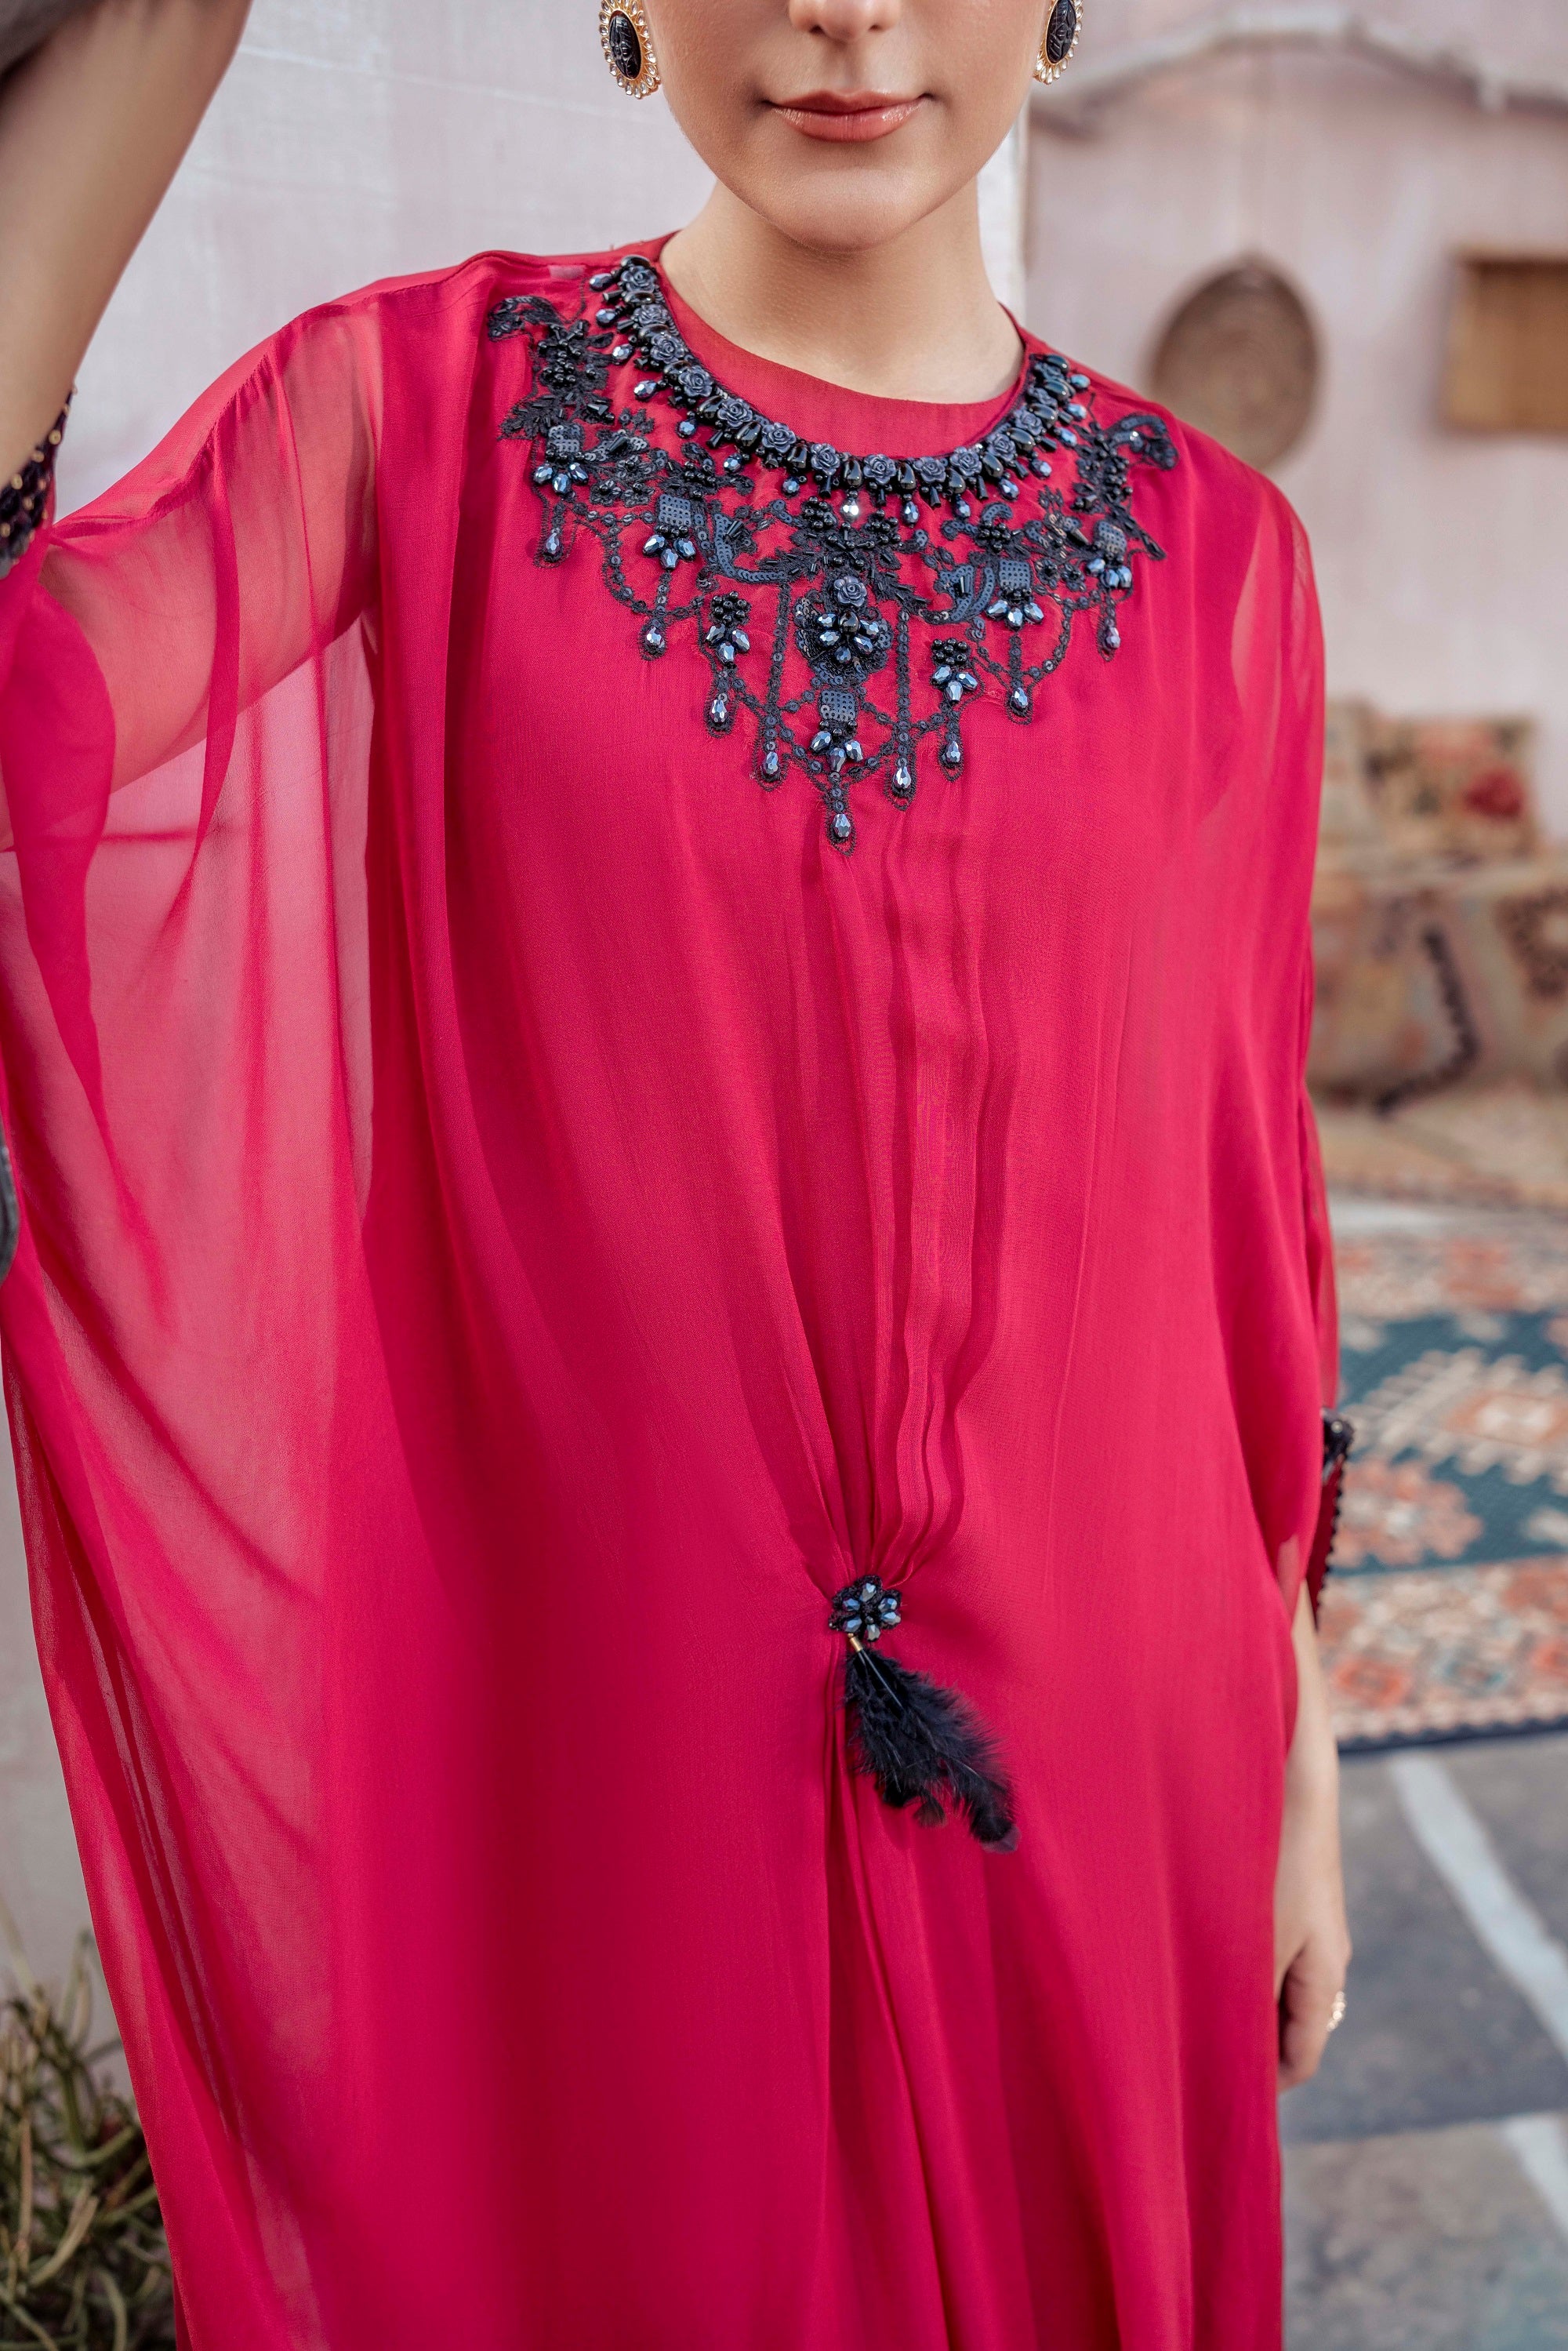 1-PC Formal Embroidered chiffon